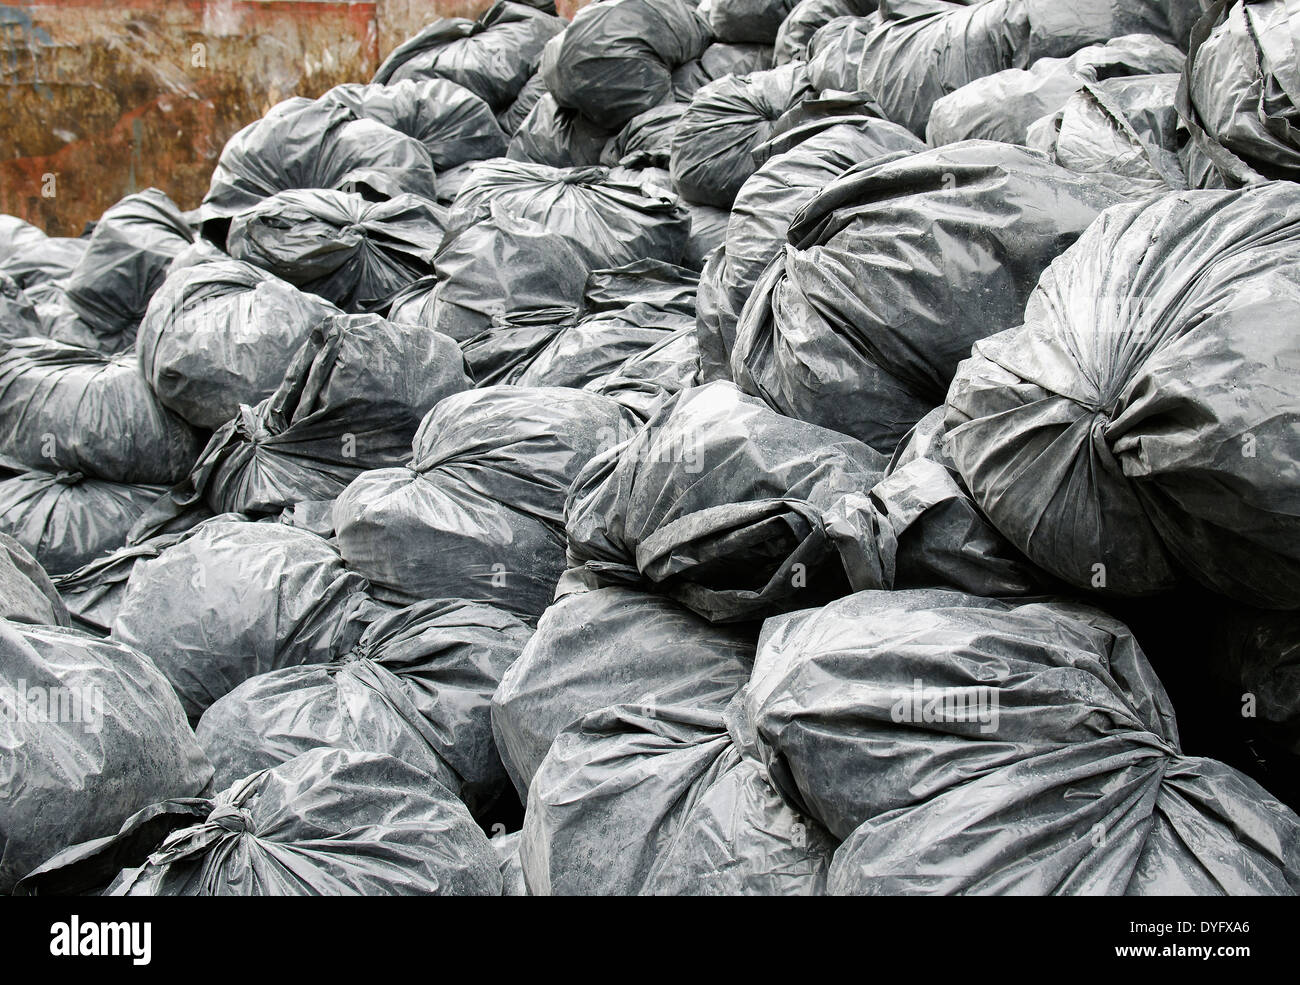 construction garbage bags in dumpster Stock Photo